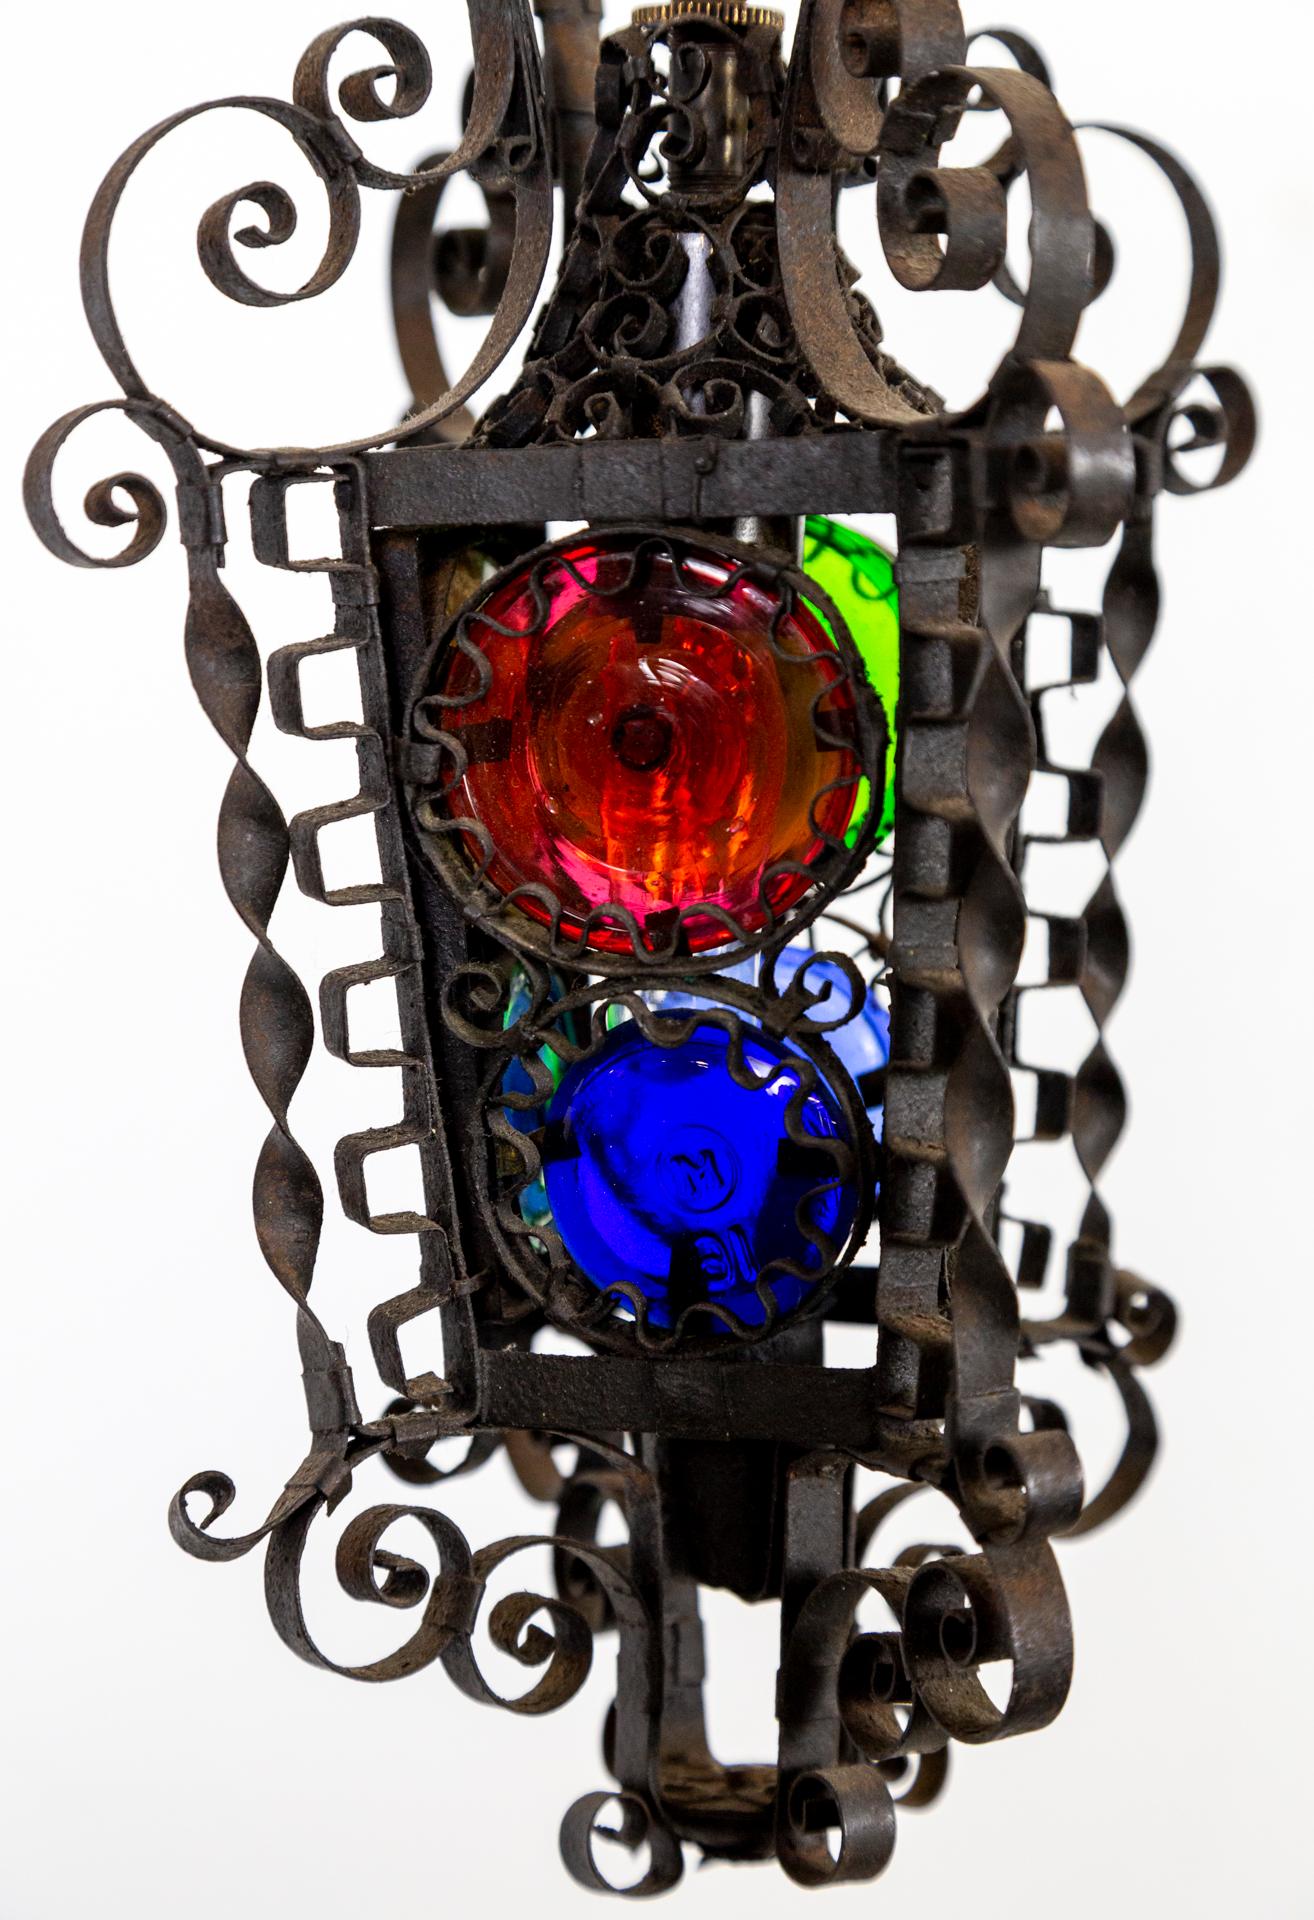 19th Century Black Filigree Iron Hanging Wall Lantern W/ Colored Glass For Sale 2